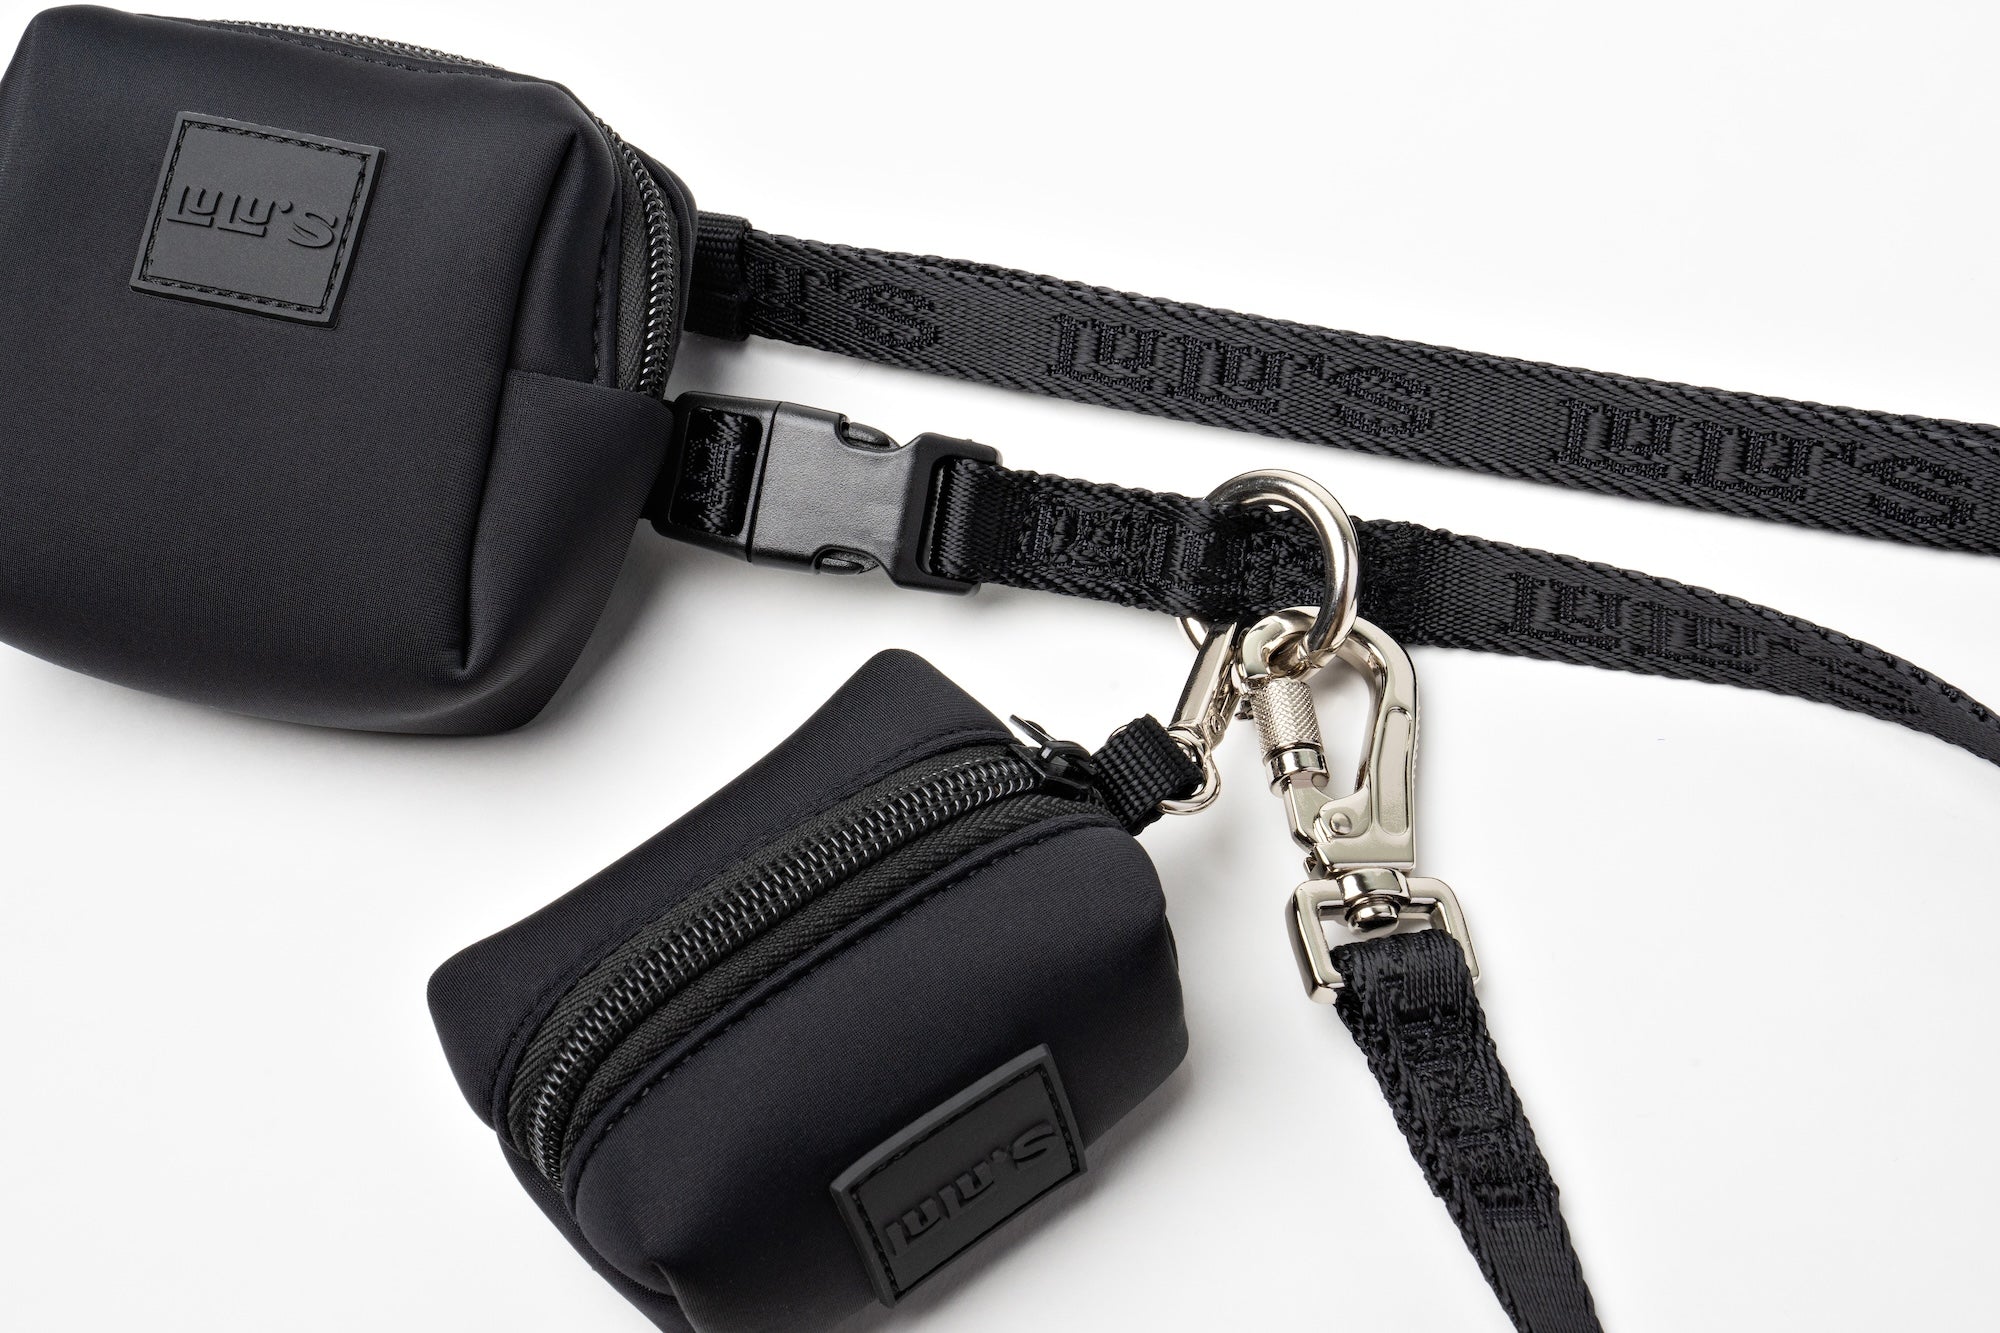 Close-up of Lulu's Midnight Black accessory set, featuring a sleek waste bag holder, treat pouch, and durable leash with secure attachments.